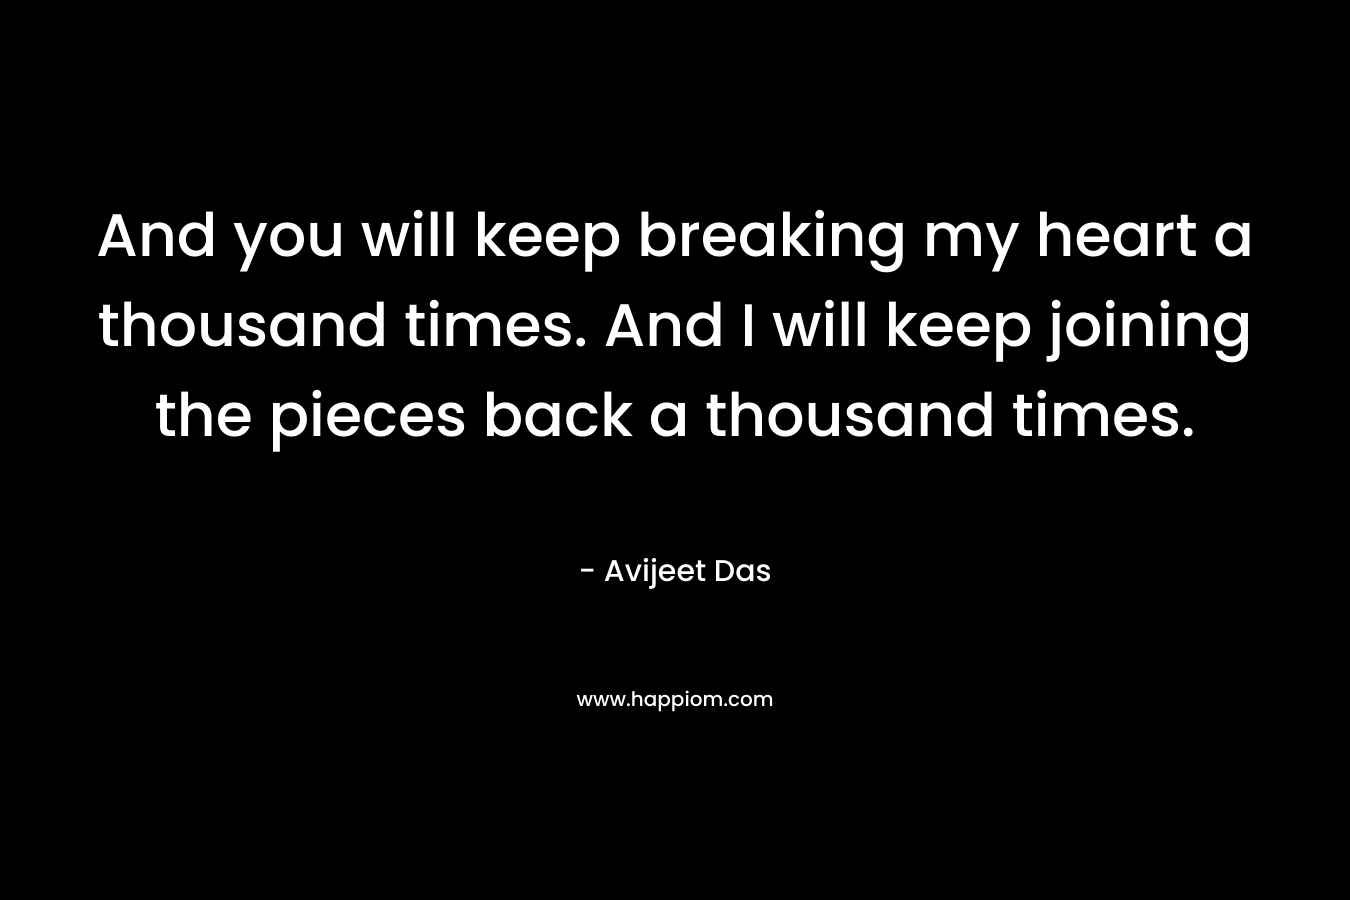 And you will keep breaking my heart a thousand times. And I will keep joining the pieces back a thousand times. – Avijeet Das